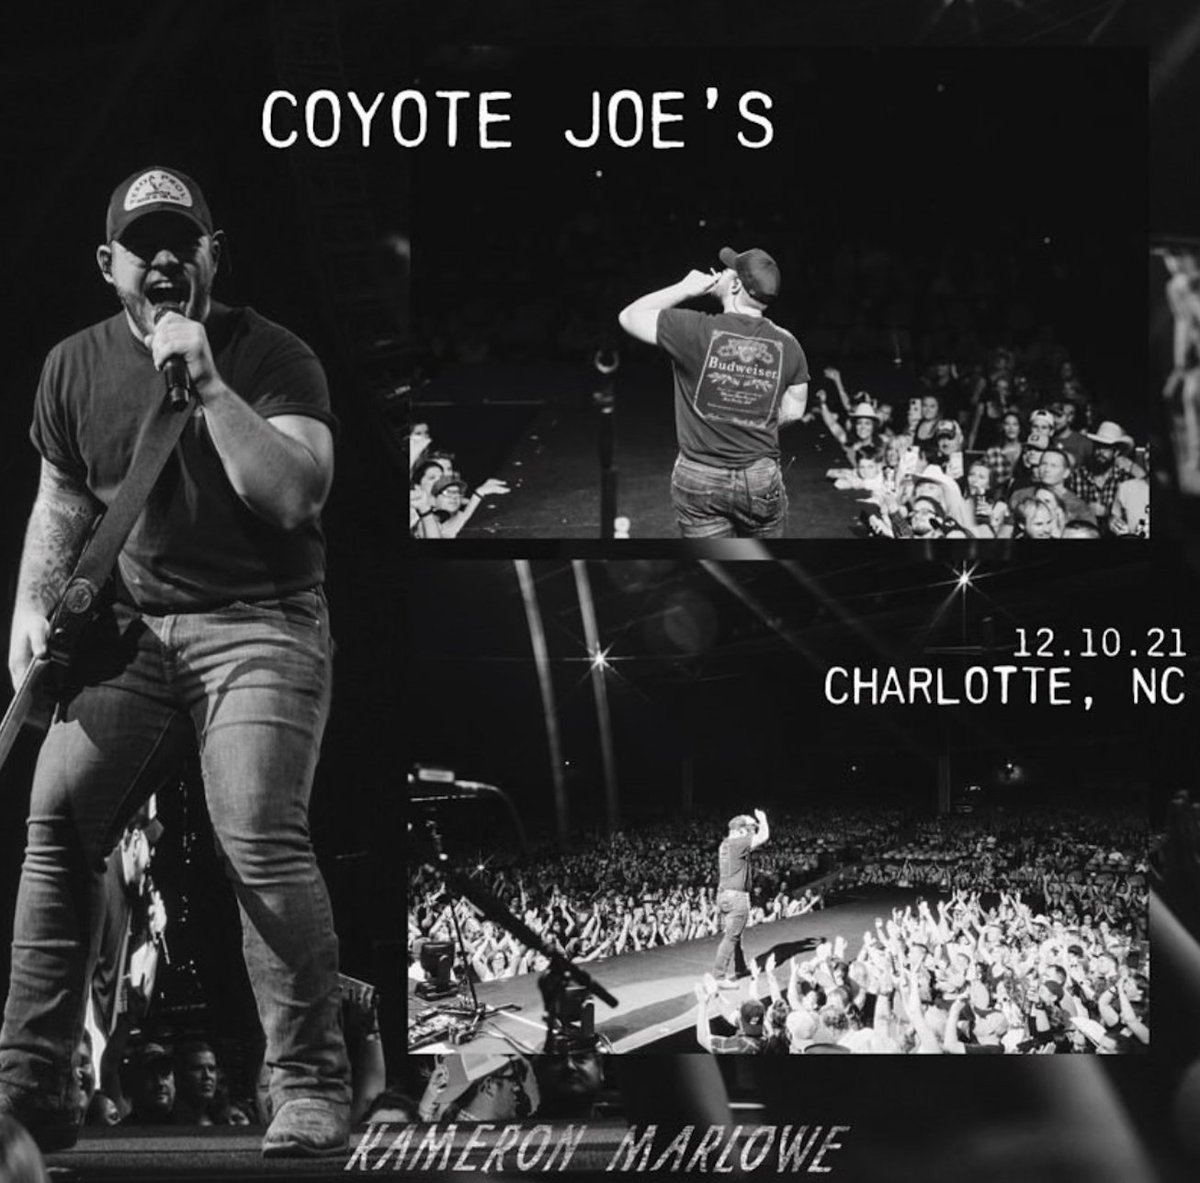 I’m pumped to be home let’s sell this bar out tickets are going fast I can’t wait to see y’all on December 10 @coyotejoes @mikelebuckband